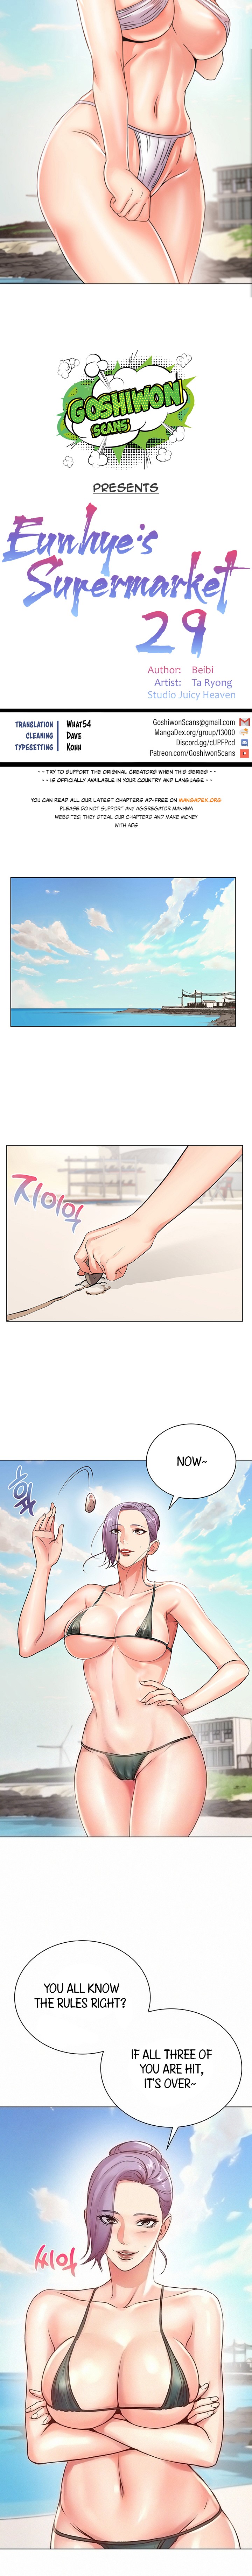 Eunhye’s Supermarket - Chapter 29 Page 2